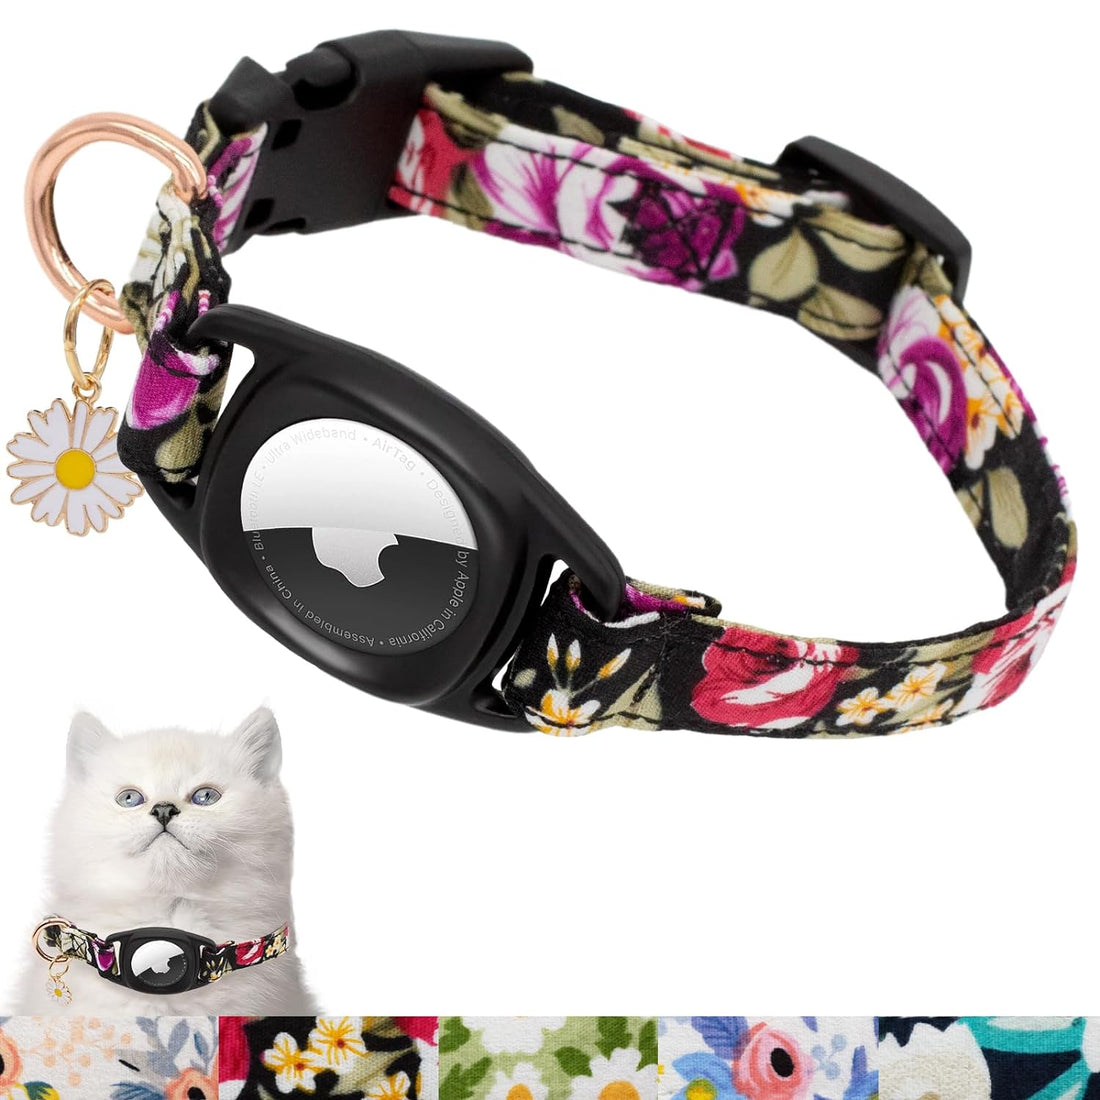 Airtag Cat Collar, HSIGIO GPS Cat Collar Breakaway with Apple Air Tag Holder & Flower Charm, Floral Cat Tracker Collar in 0.6 Inches Width for Girl Boy Cats, Kittens and Puppies (XS, Black Red Rose)